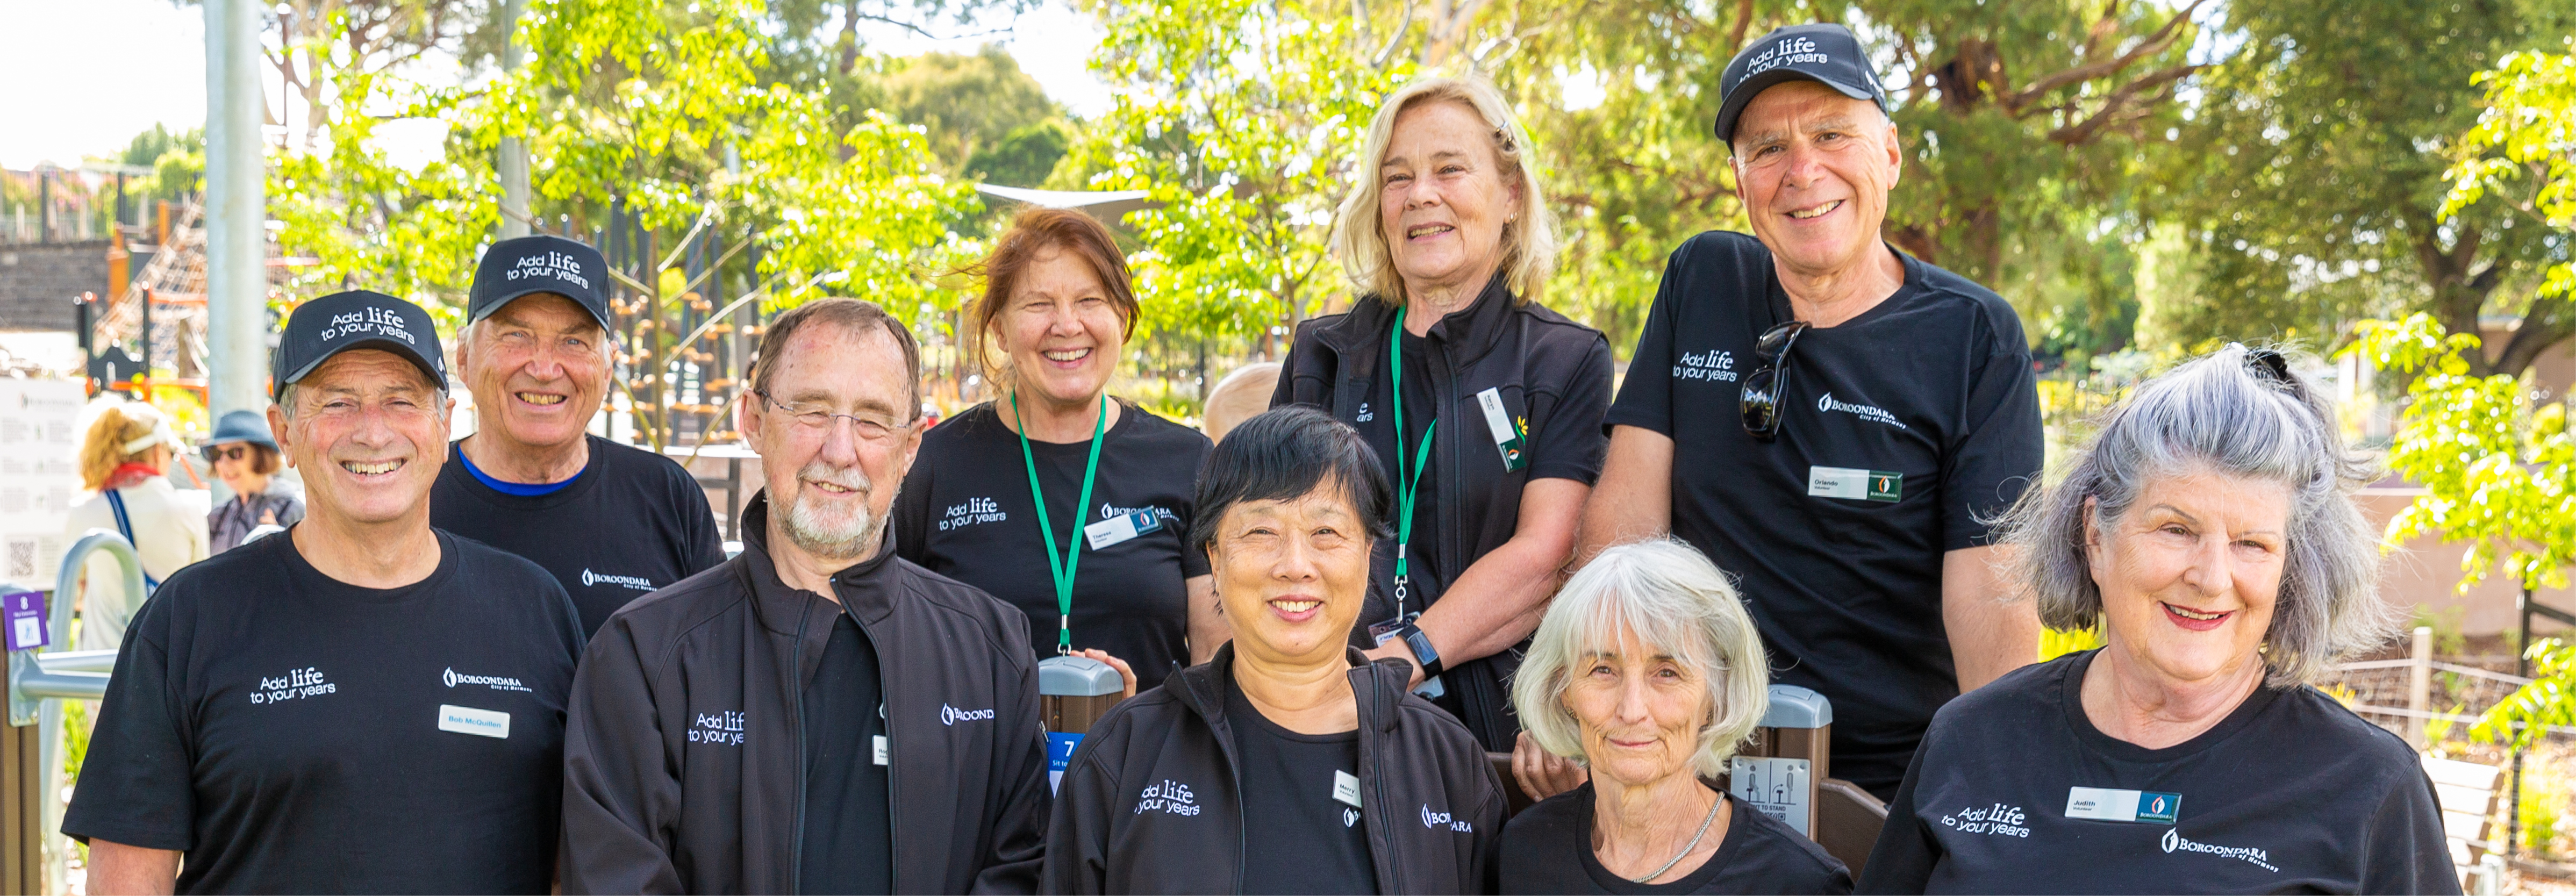 A group of 9 older people who are volunteers at the seniors exercise park program, standing together at the park in their volunteer uniform